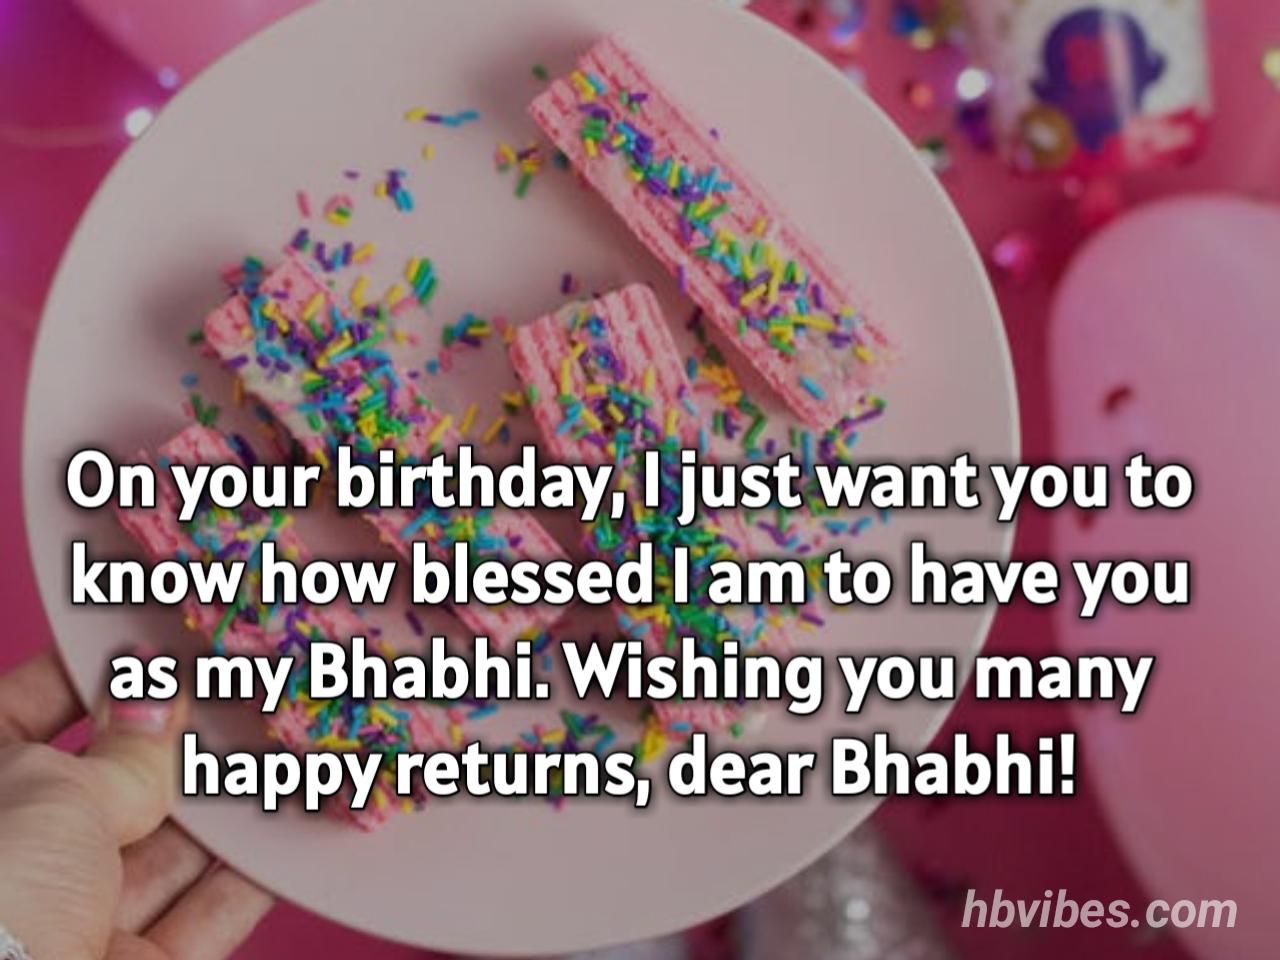 Pink slices and wishes dear bhabhi